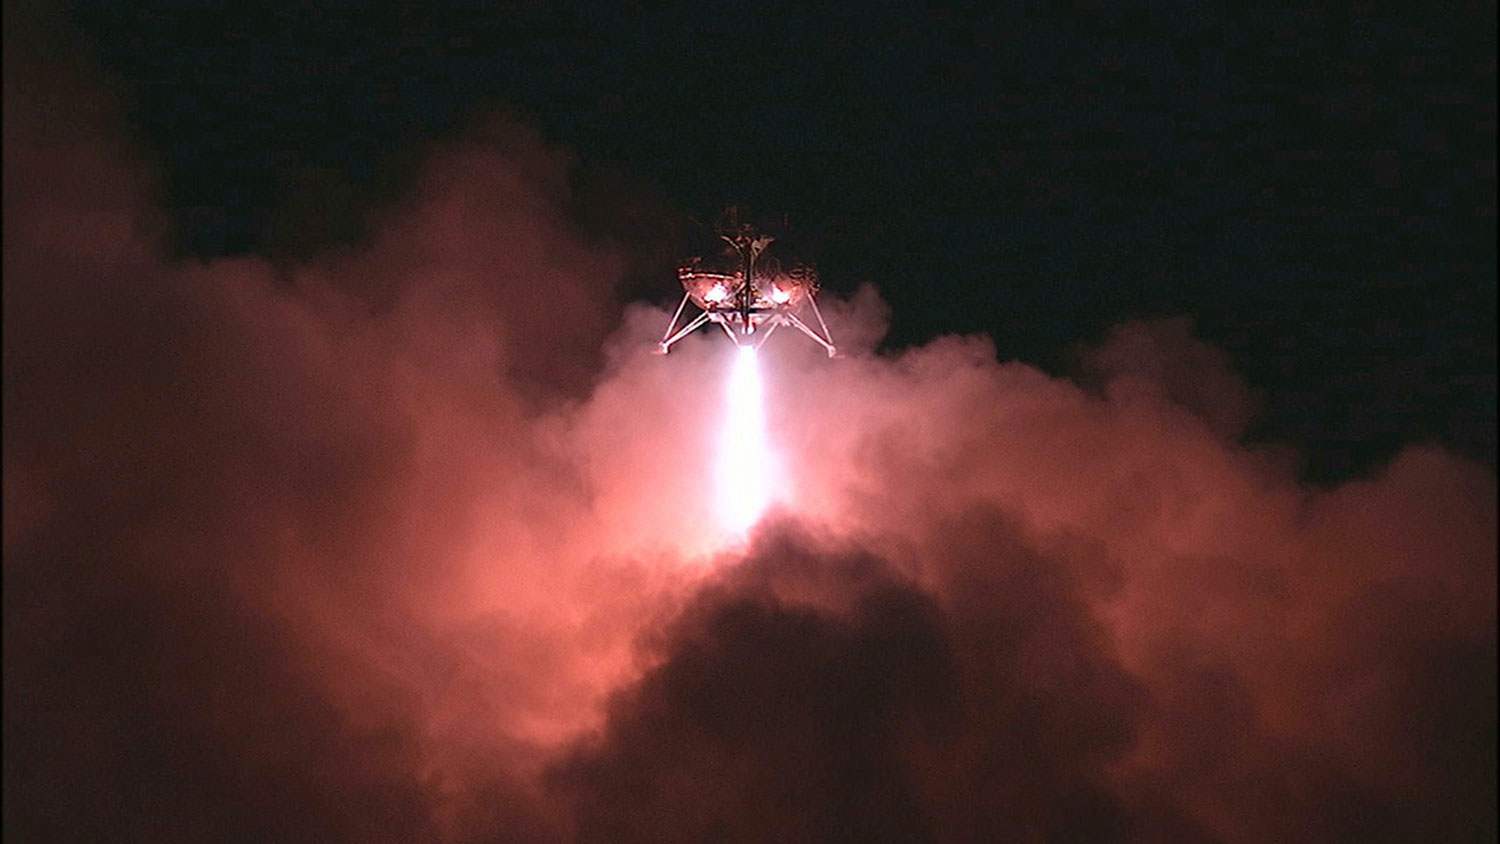 NASA's Morpheus prototype lander and Autonomous Landing Hazard Avoidance Technology, or ALHAT, successfully completes a test landing at the Kennedy Space Center in Florida on May 28, 2014.